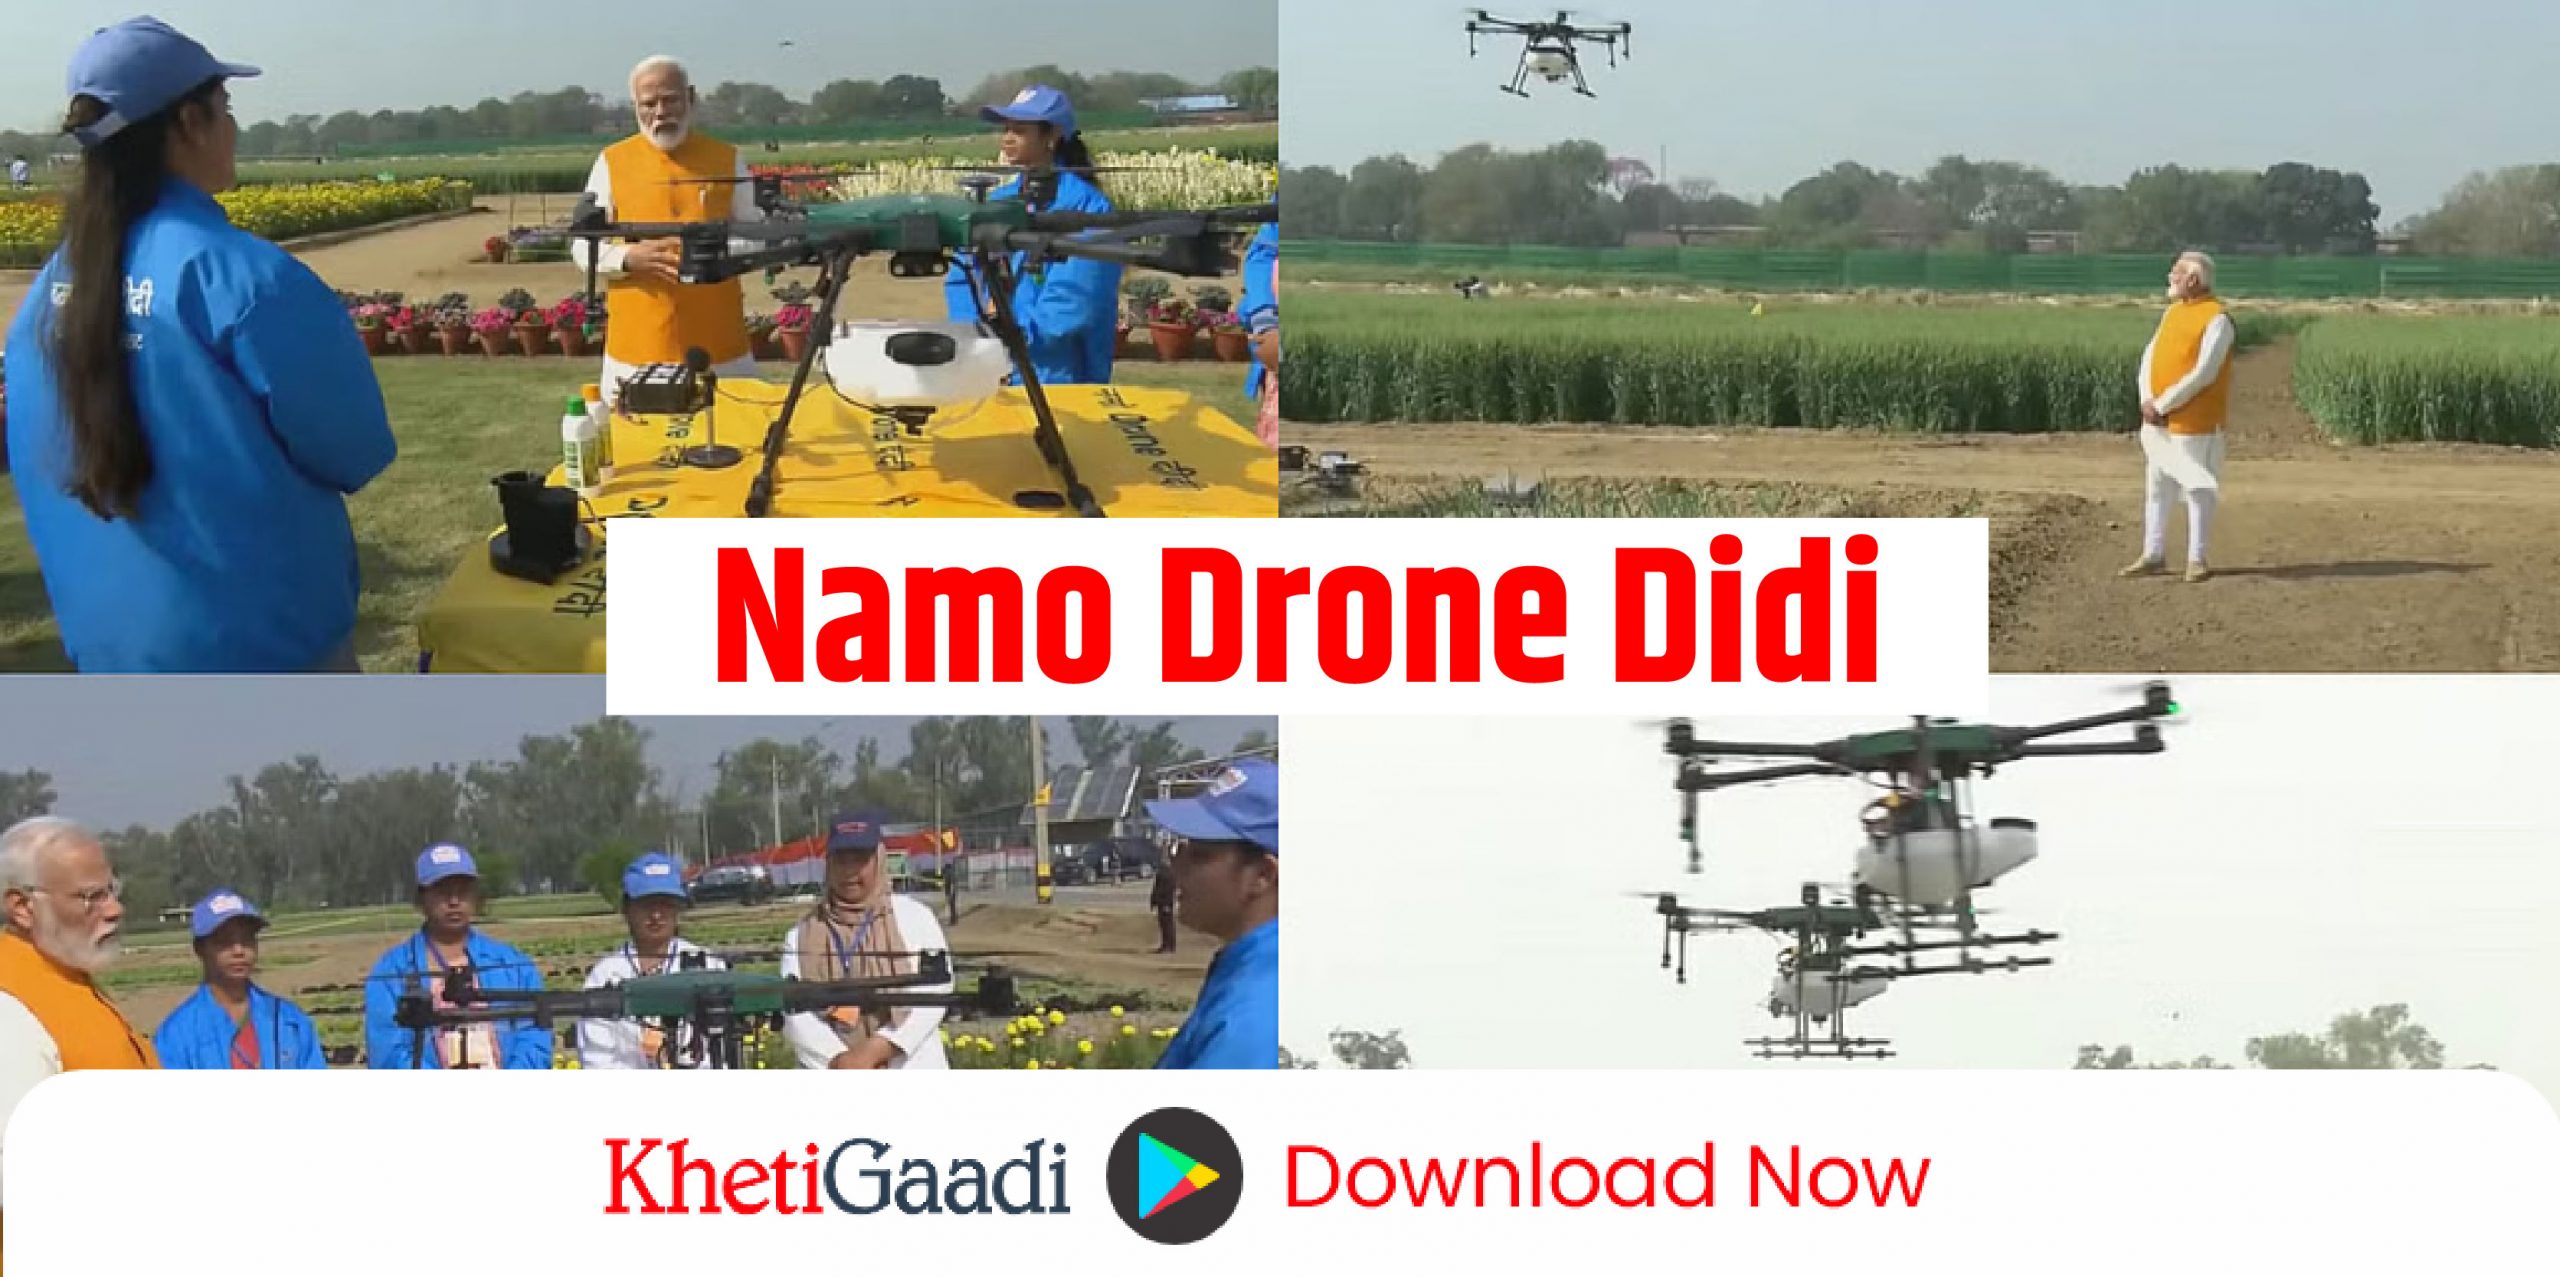 PM Modi attended the drone demonstration conducted by the ‘Namo Drone Didi’, know more about the scheme